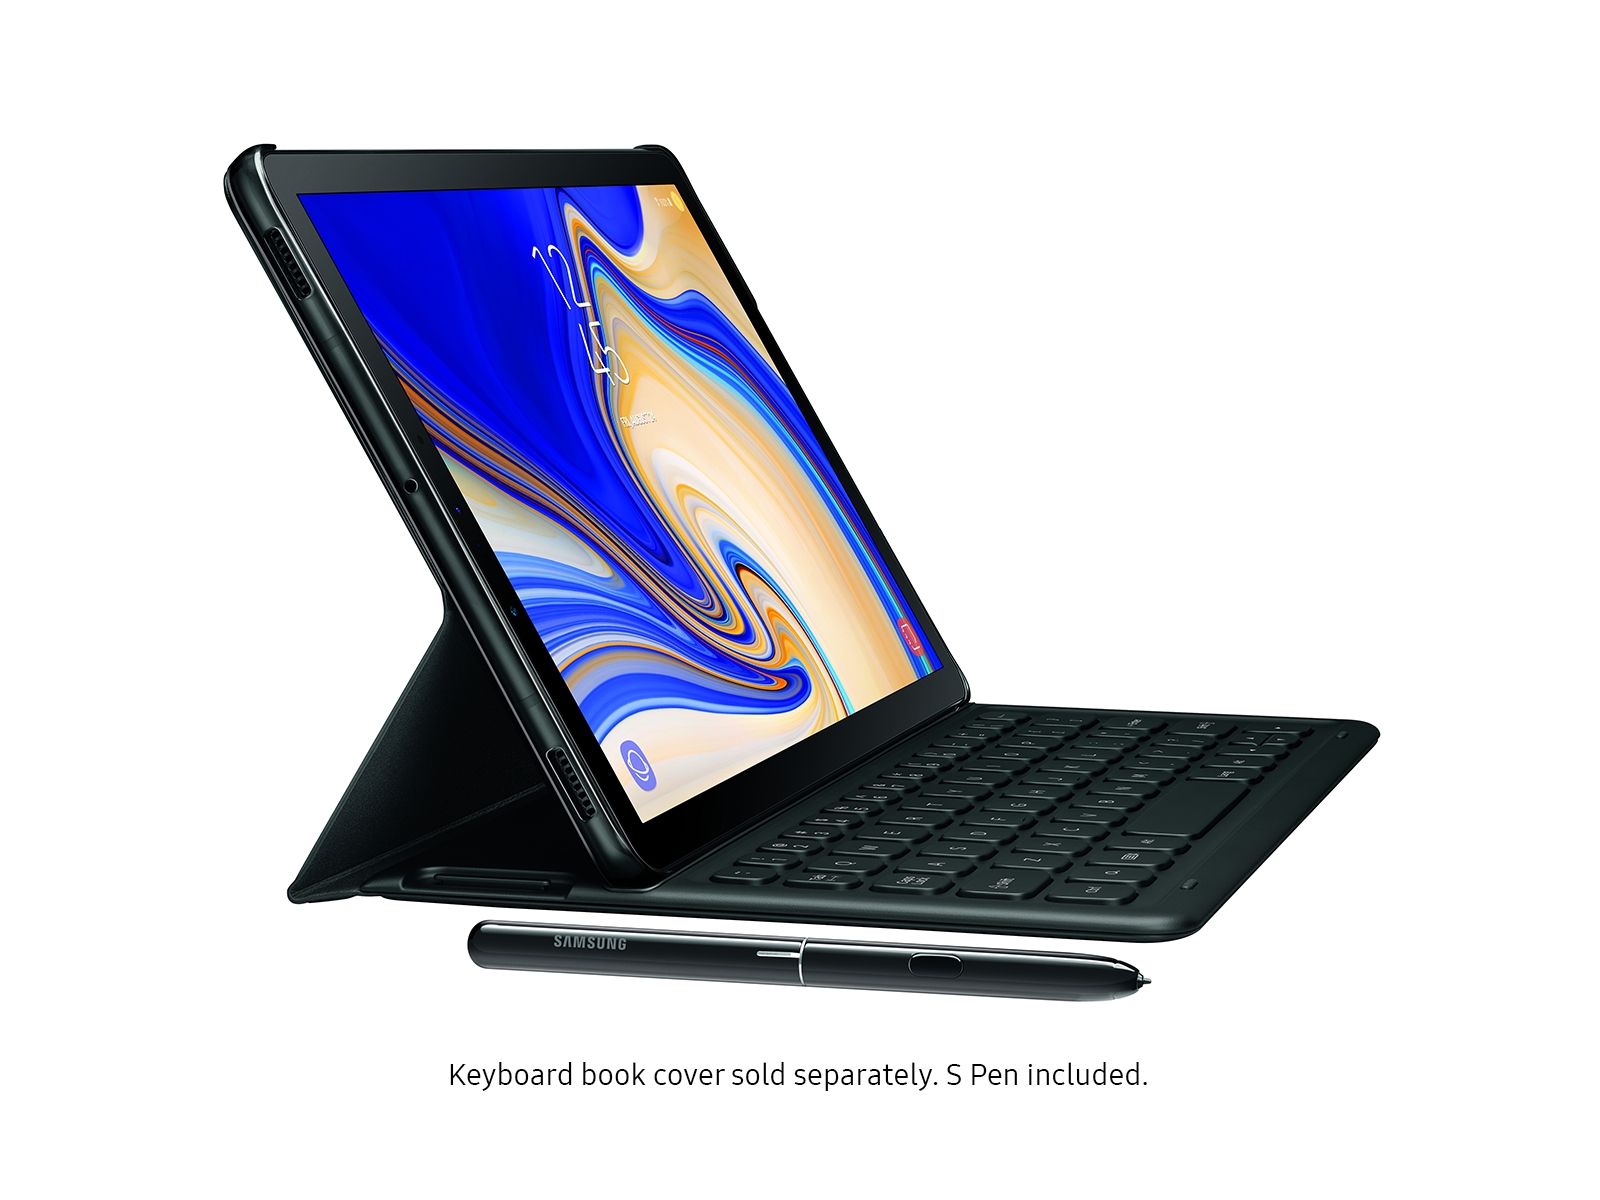 PC/タブレット タブレット Galaxy Tab S4 10.5” (S Pen included), 64GB, Black, Sprint Tablets 